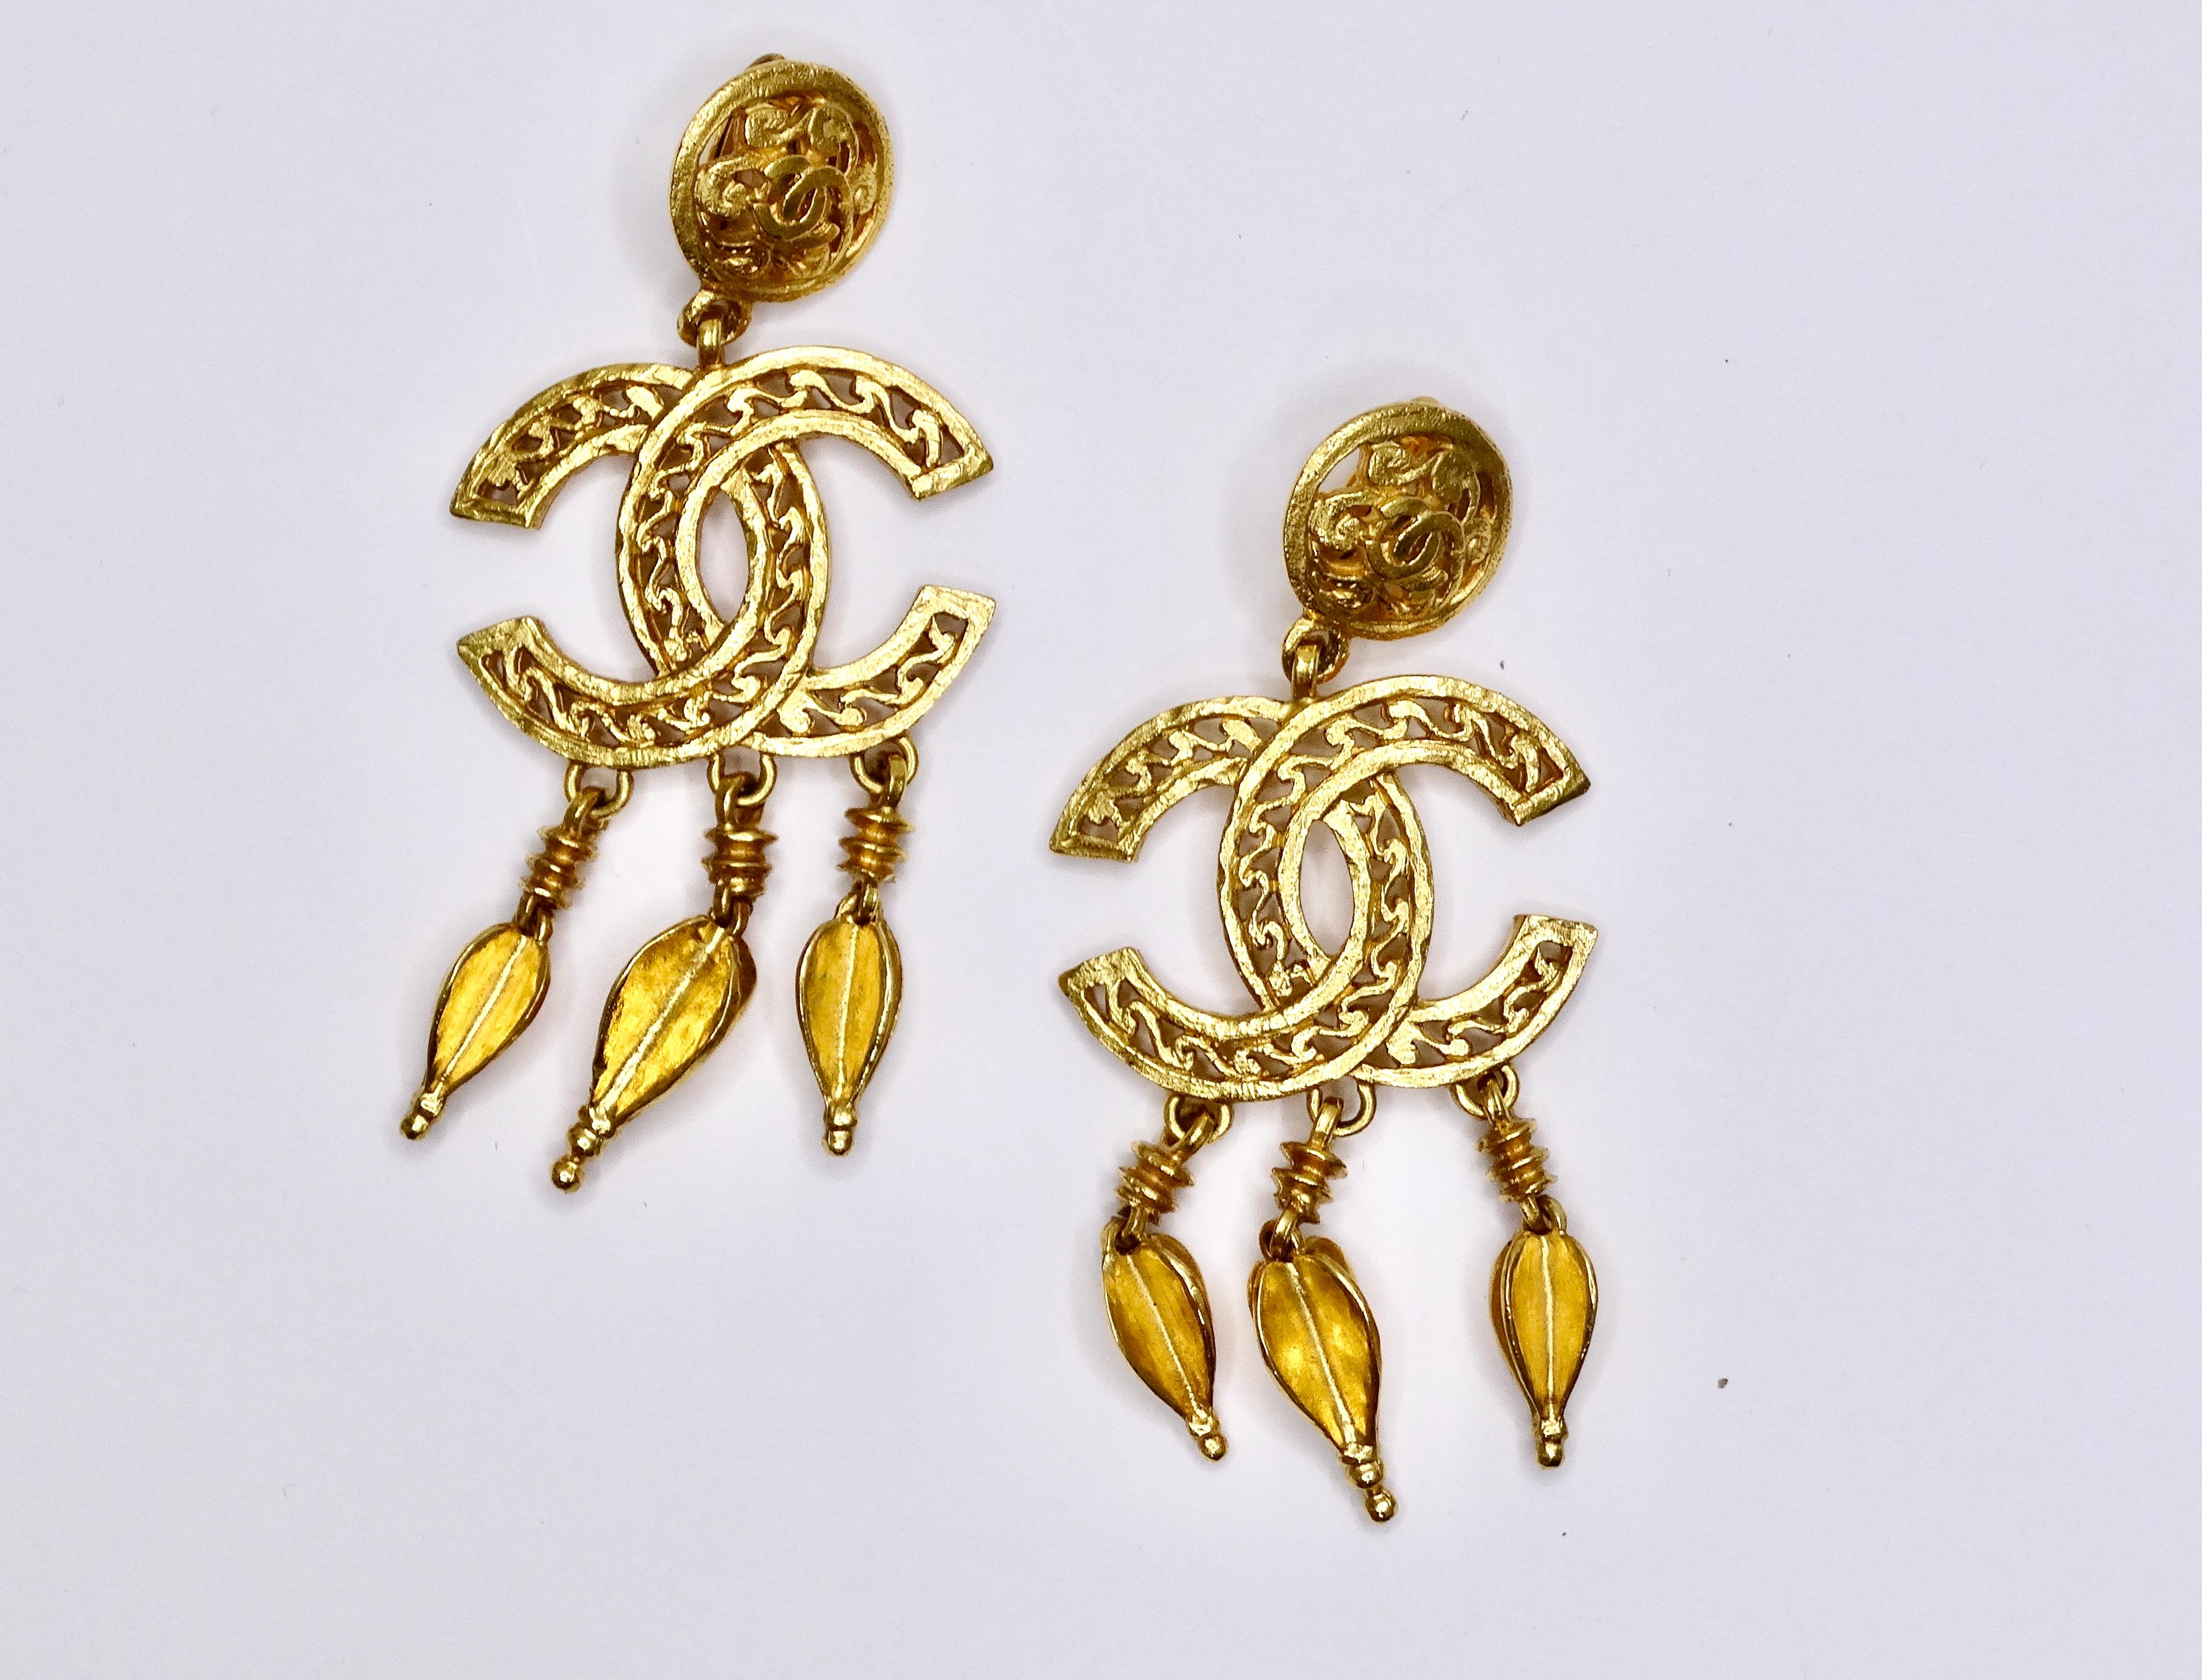 Chanel Ornate Dangle Earrings In Excellent Condition For Sale In Scottsdale, AZ